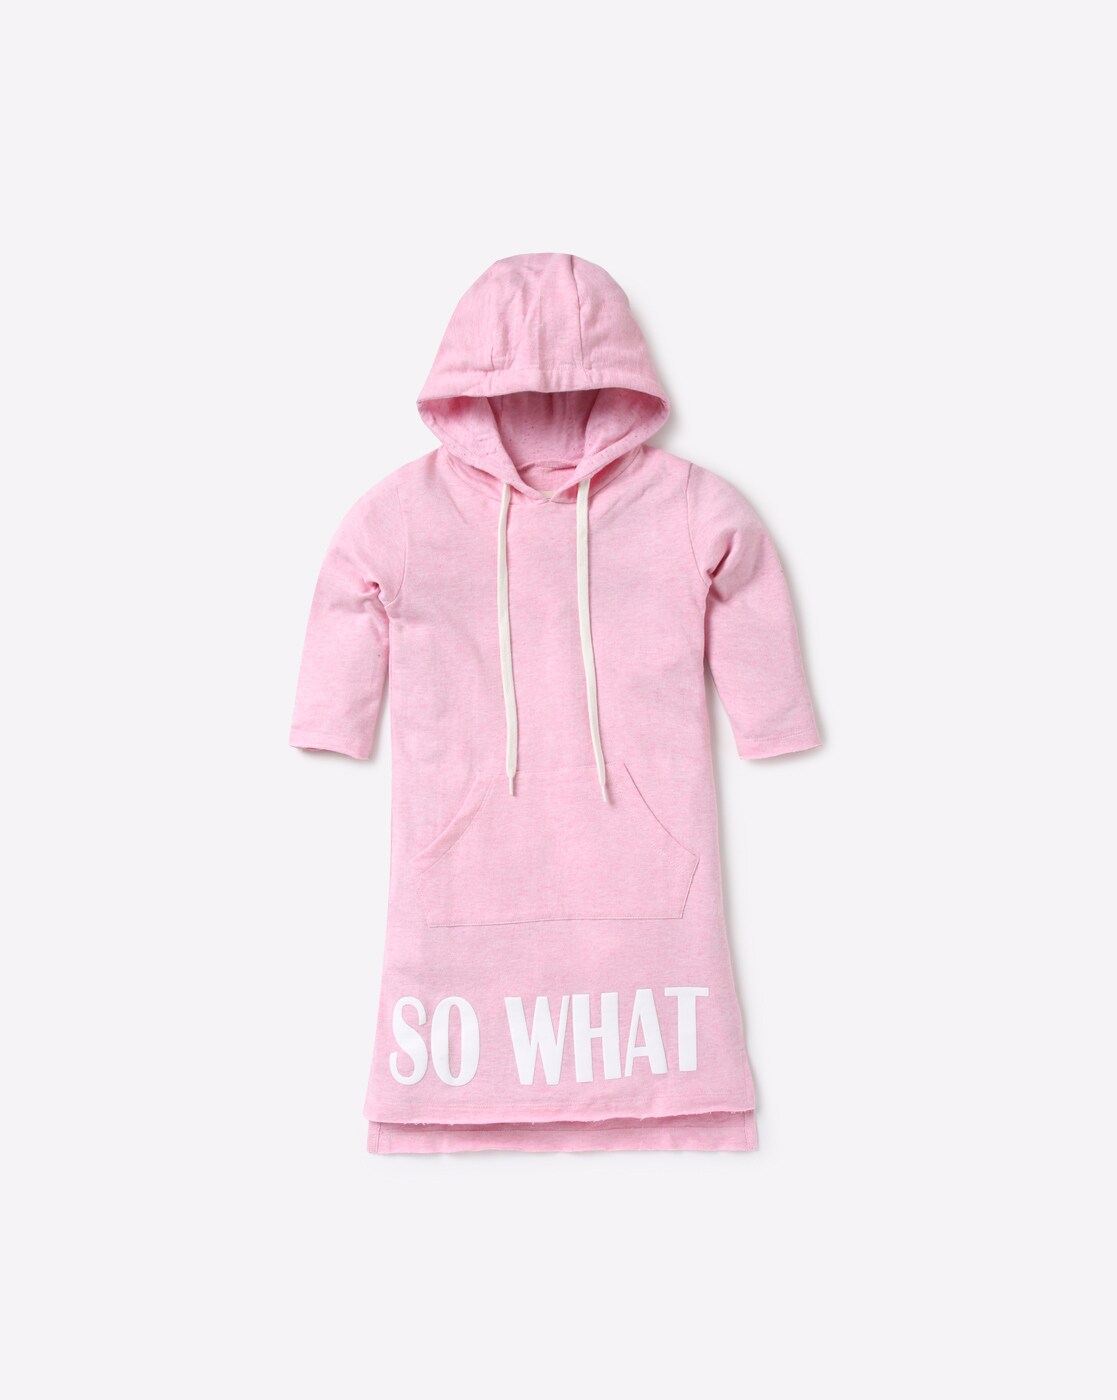 Girls Hoodie Dress : Amazon.in: Clothing & Accessories